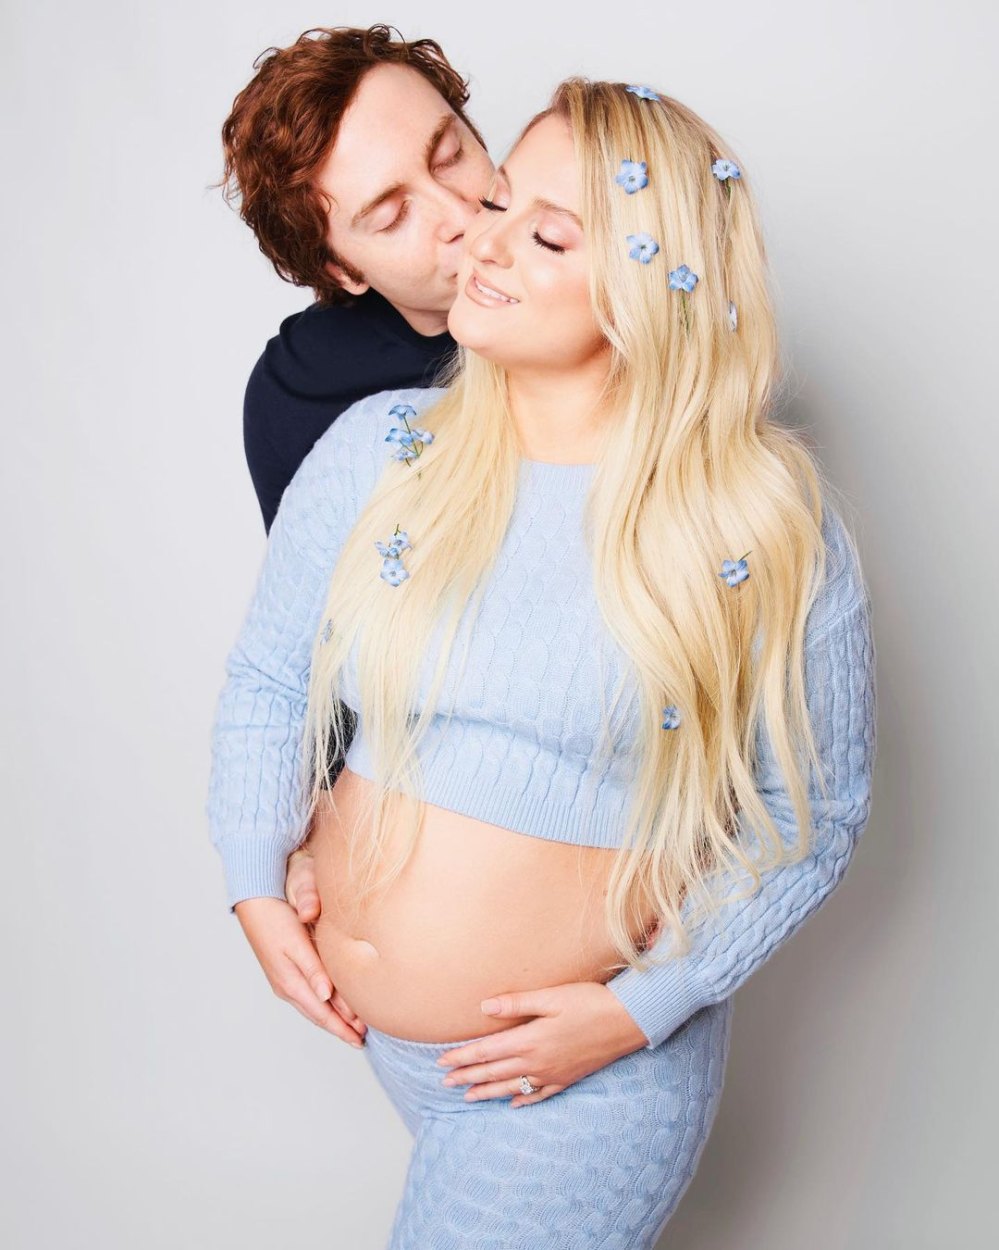 Pregnant Meghan Trainor Shows Bare Baby Bump While Celebrating Anniversary With Daryl Sabara